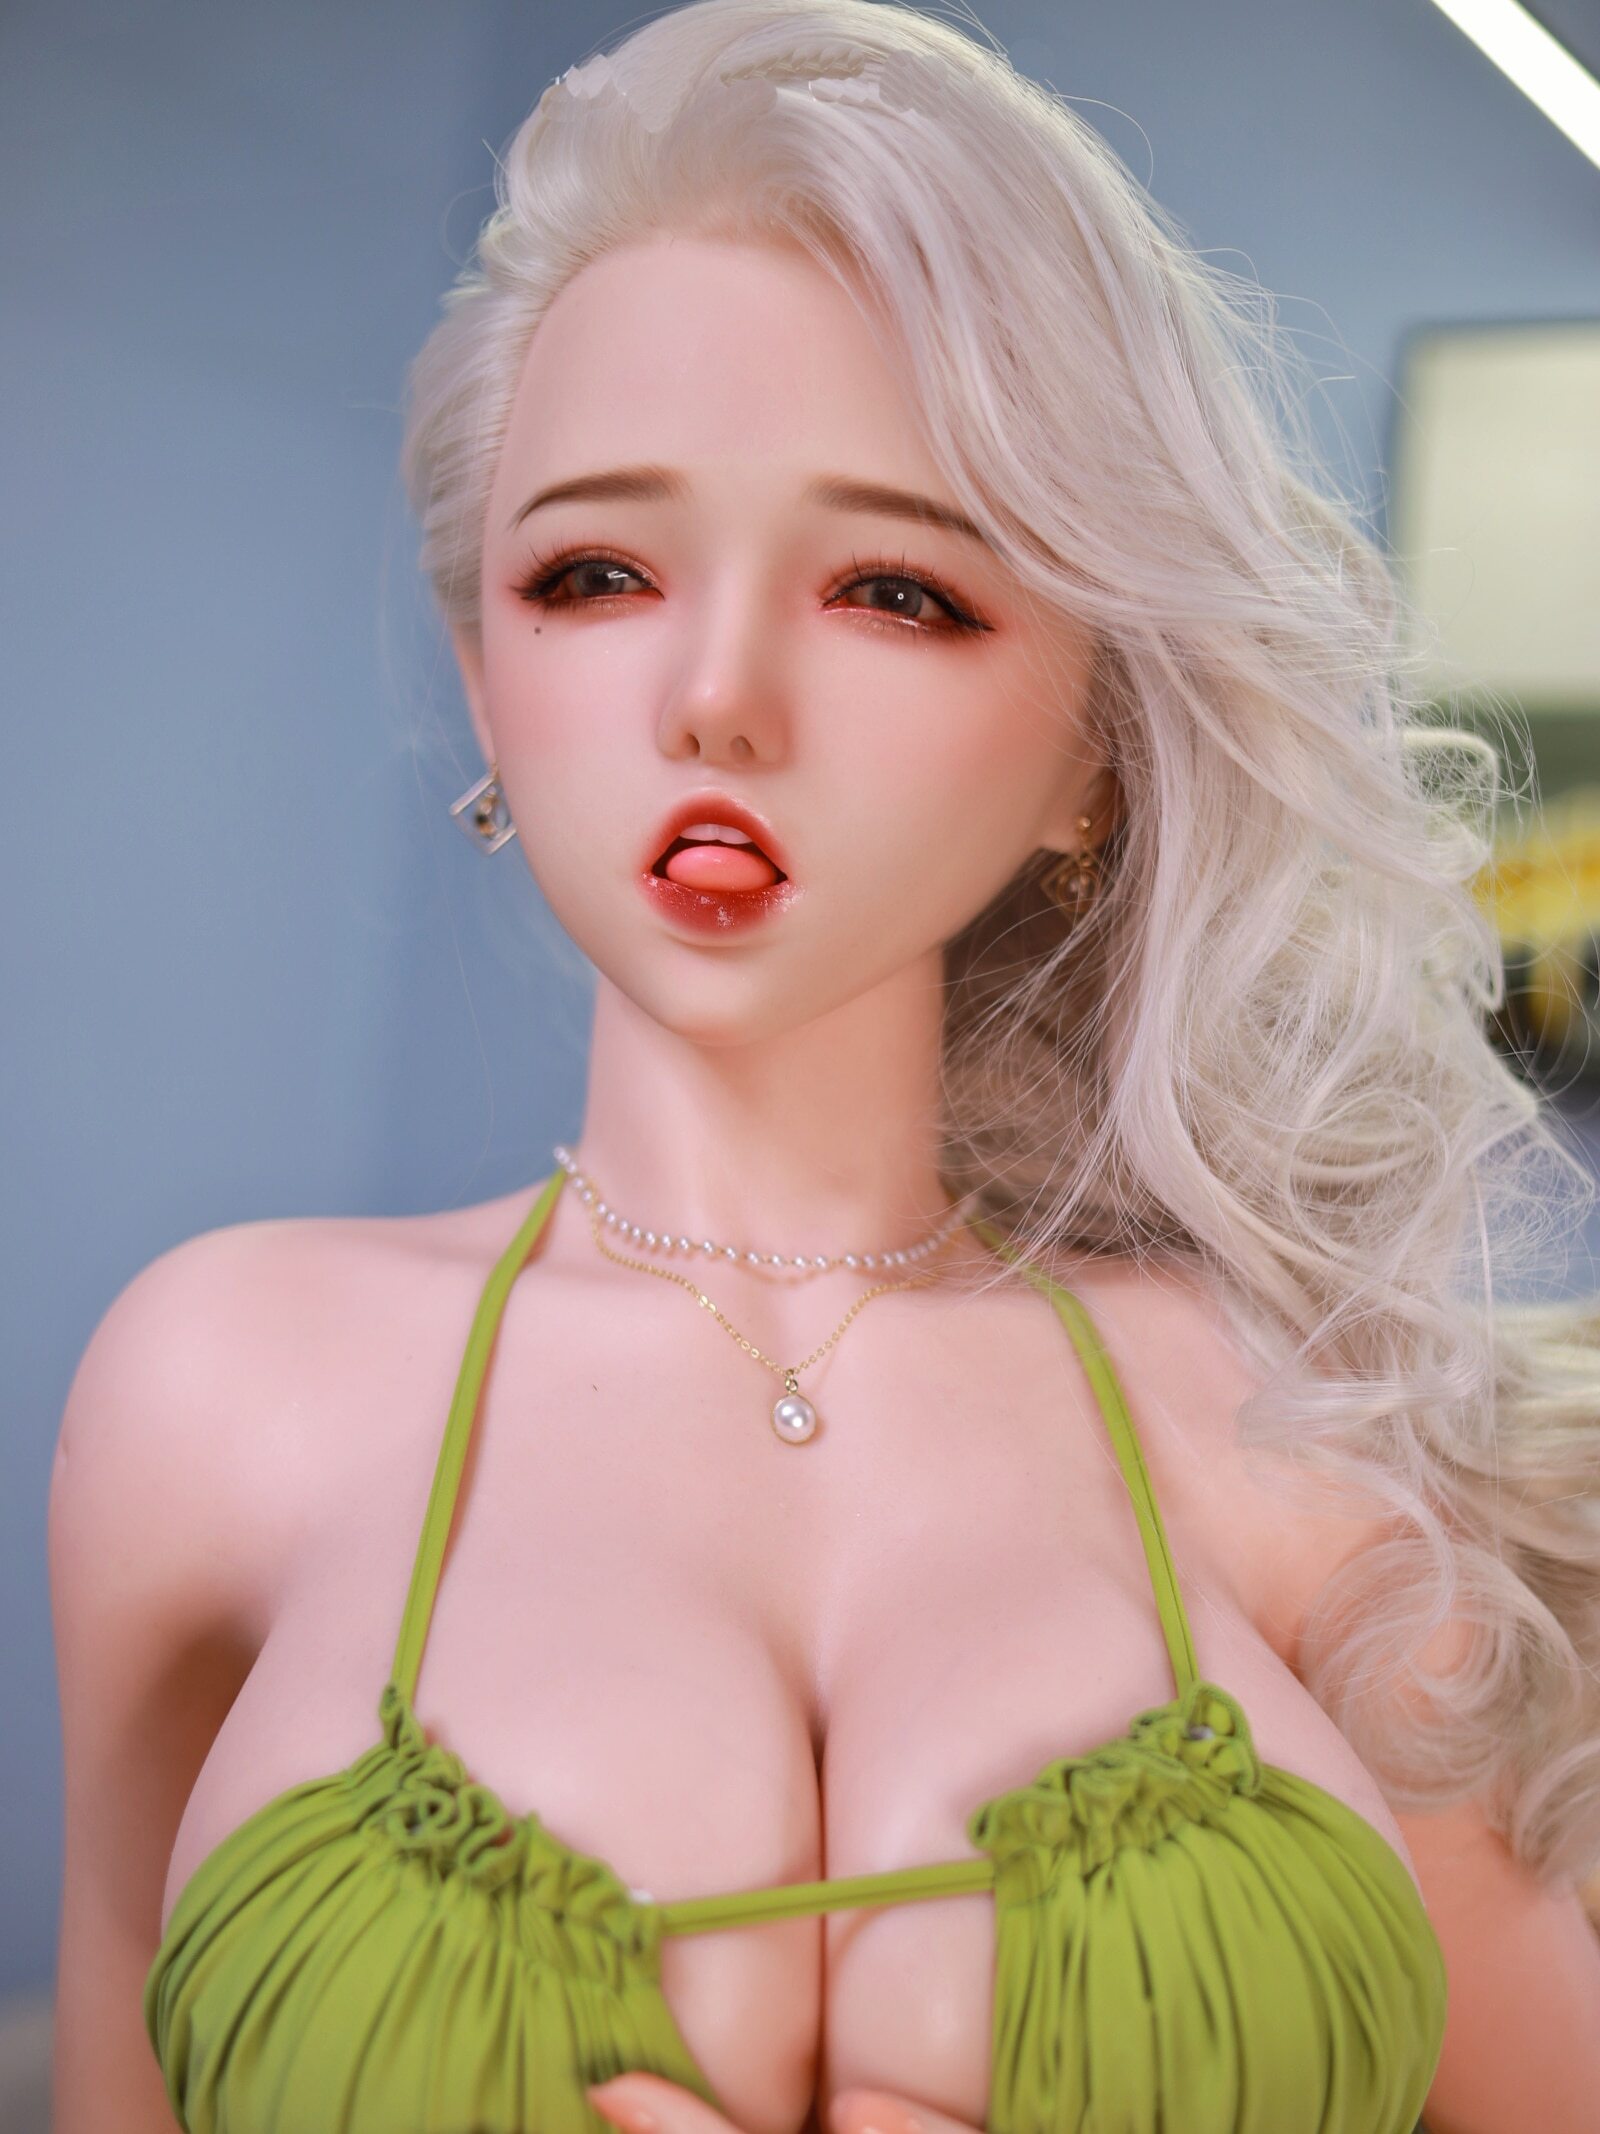 Full Silicone doll with Oral sex Realistic Anal Pussy Sex for Men Masturbator Love Dolls,Masturbator,Love Dolls,Adult sex dolls,Adult Dolls,Adult Love Dolls